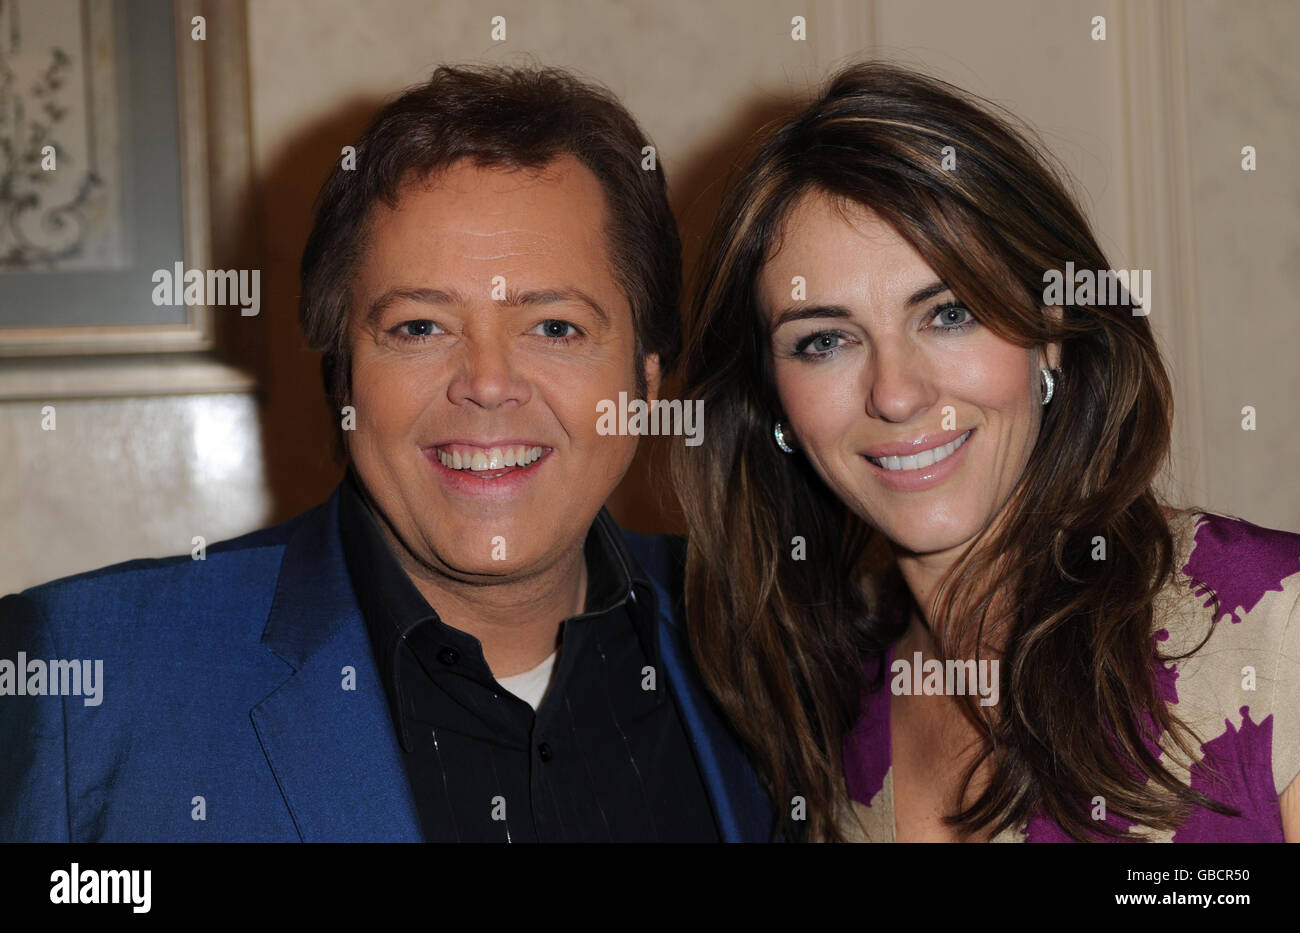 Grease fan Elizabeth Hurley pops backstage to meet her 'Teen Angel' Jimmy Osmond, currently starring in the smash-hit musical at the Piccadilly Theatre in central London. Elizabeth confesses to having had a life size poster of Jimmy stuck to her bedroom wall when she was nine. Last year, Grease raised 500,000 for Macmillan Cancer support and as a patron of the charity Elizabeth accepted the cheque on their behalf. Stock Photo